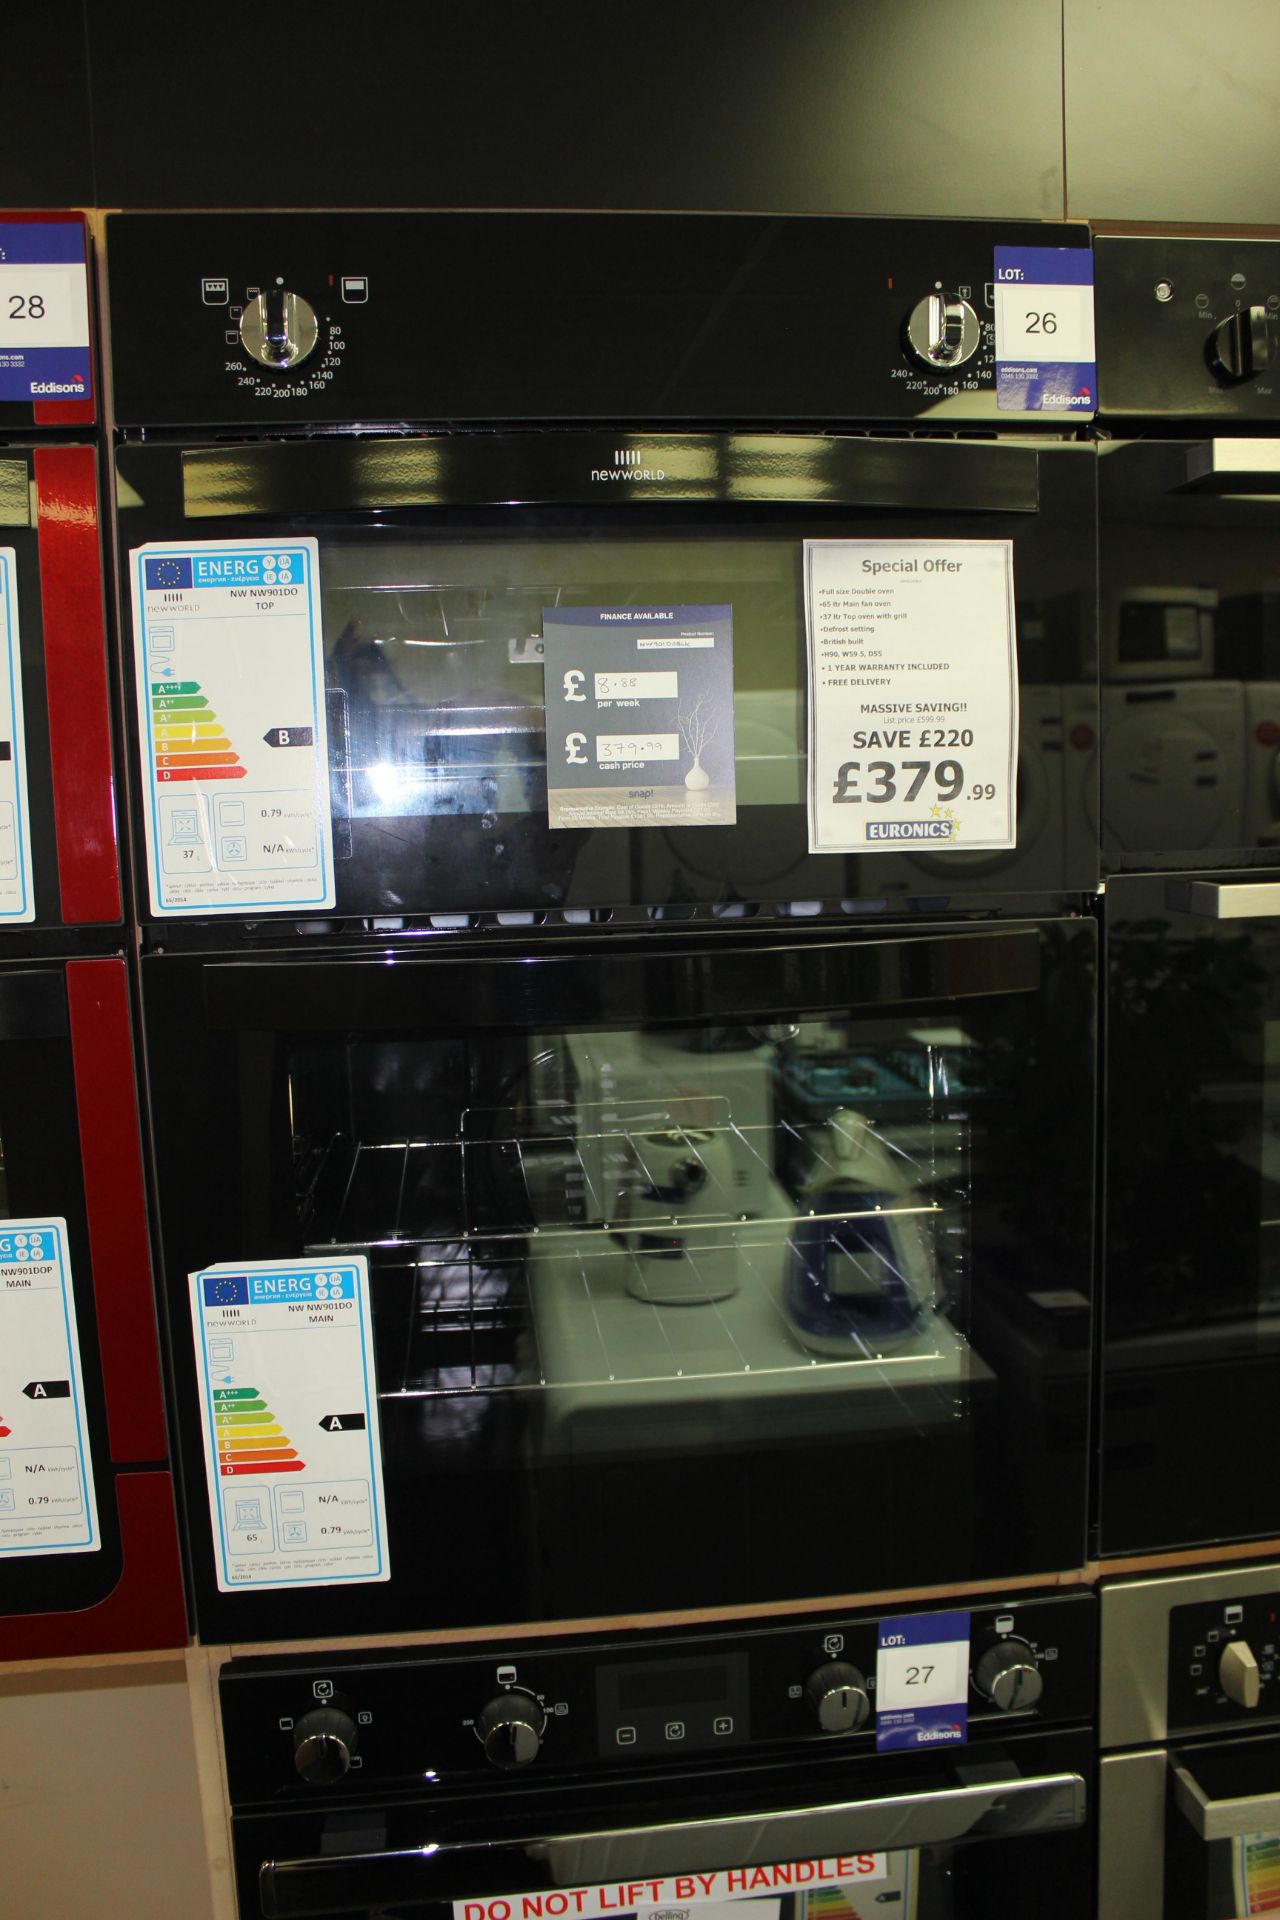 New World Full Size Double Oven NW901D08LK Rrp. £379.99